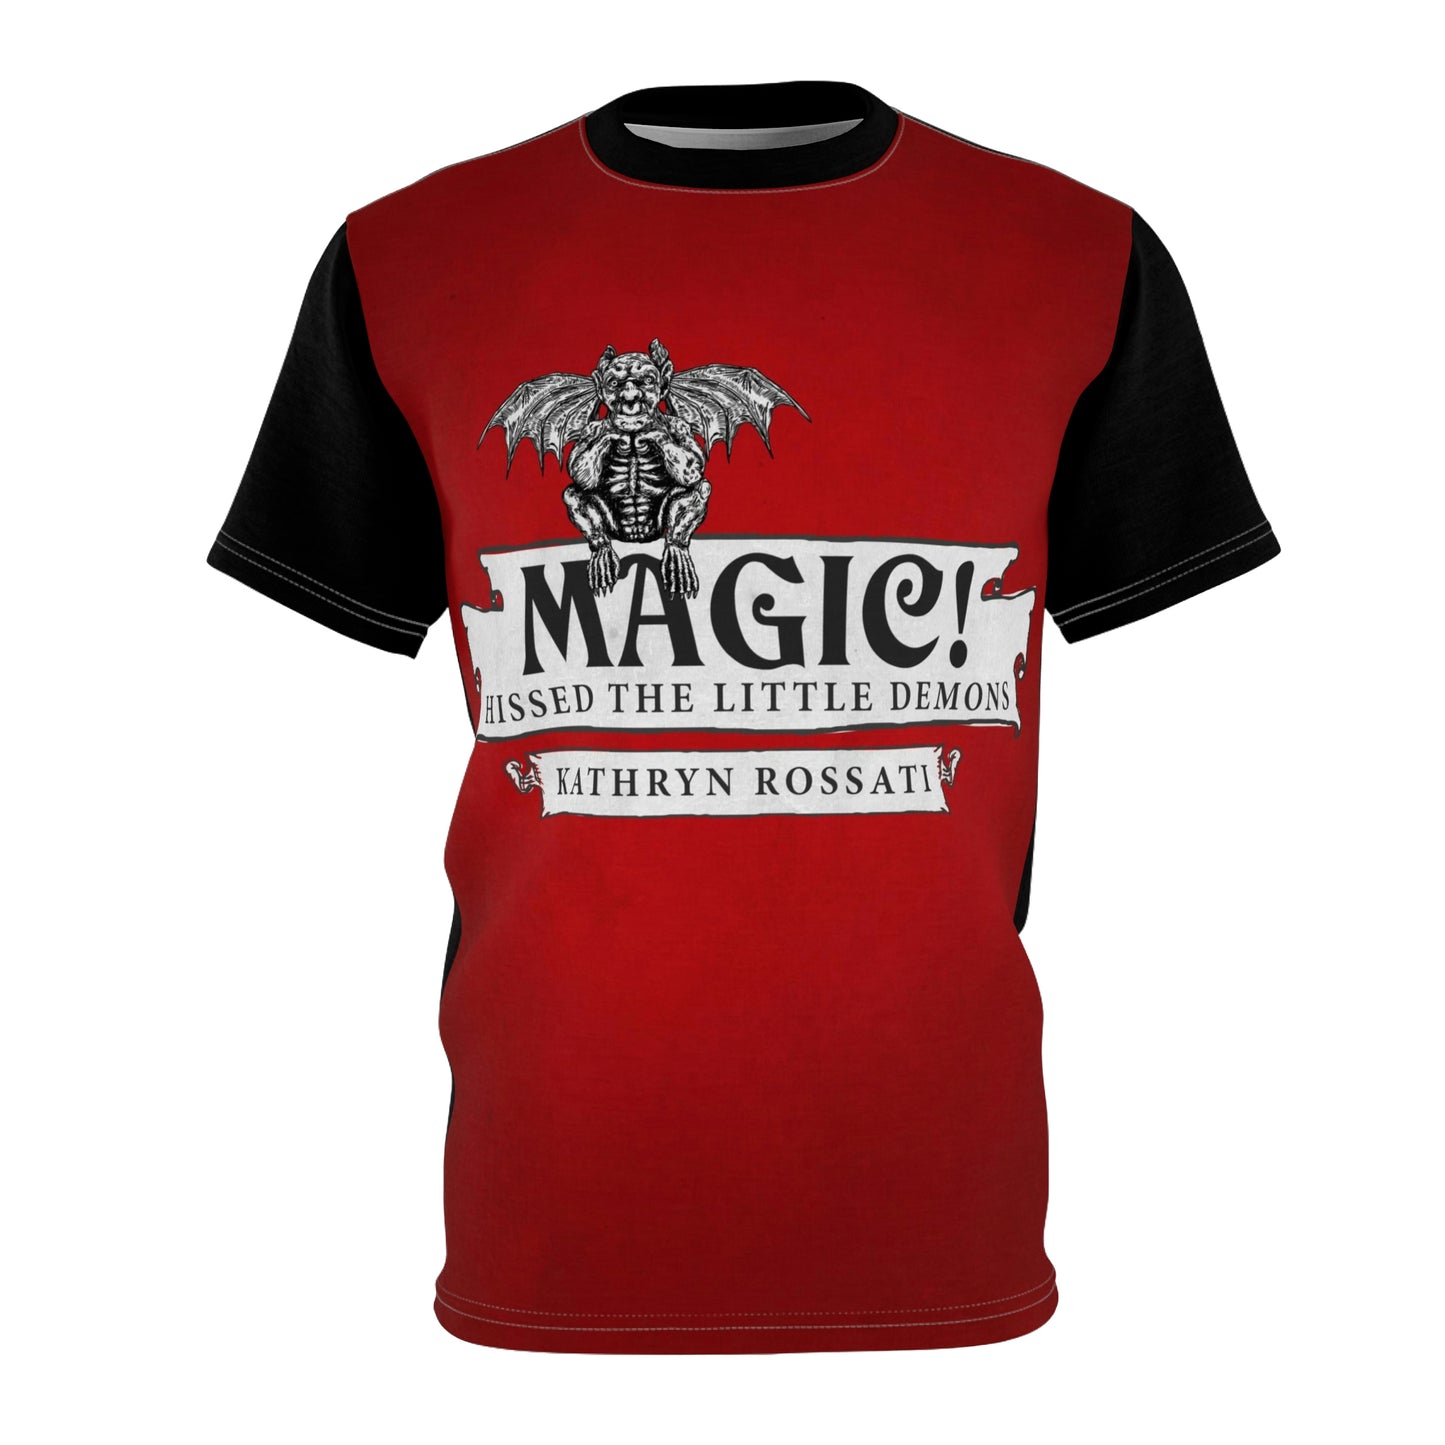 Magic! Hissed The Little Demons - Unisex All-Over Print Cut & Sew T-Shirt